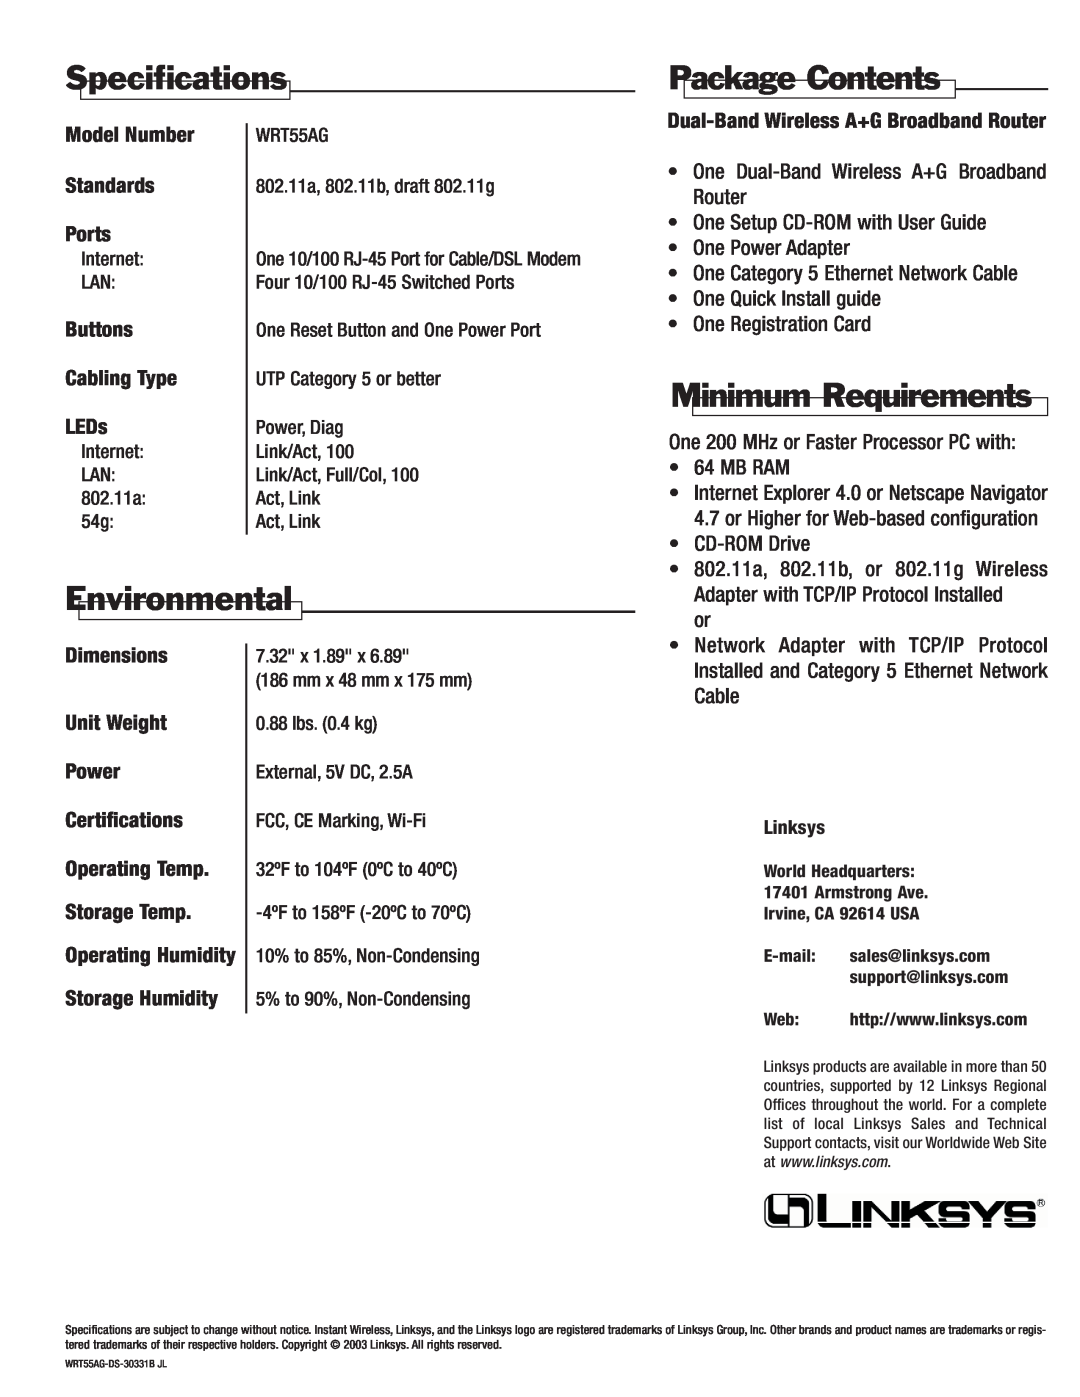 Linksys WRT55AG specifications Specifications, Package Contents, Minimum Requirements, Environmental 